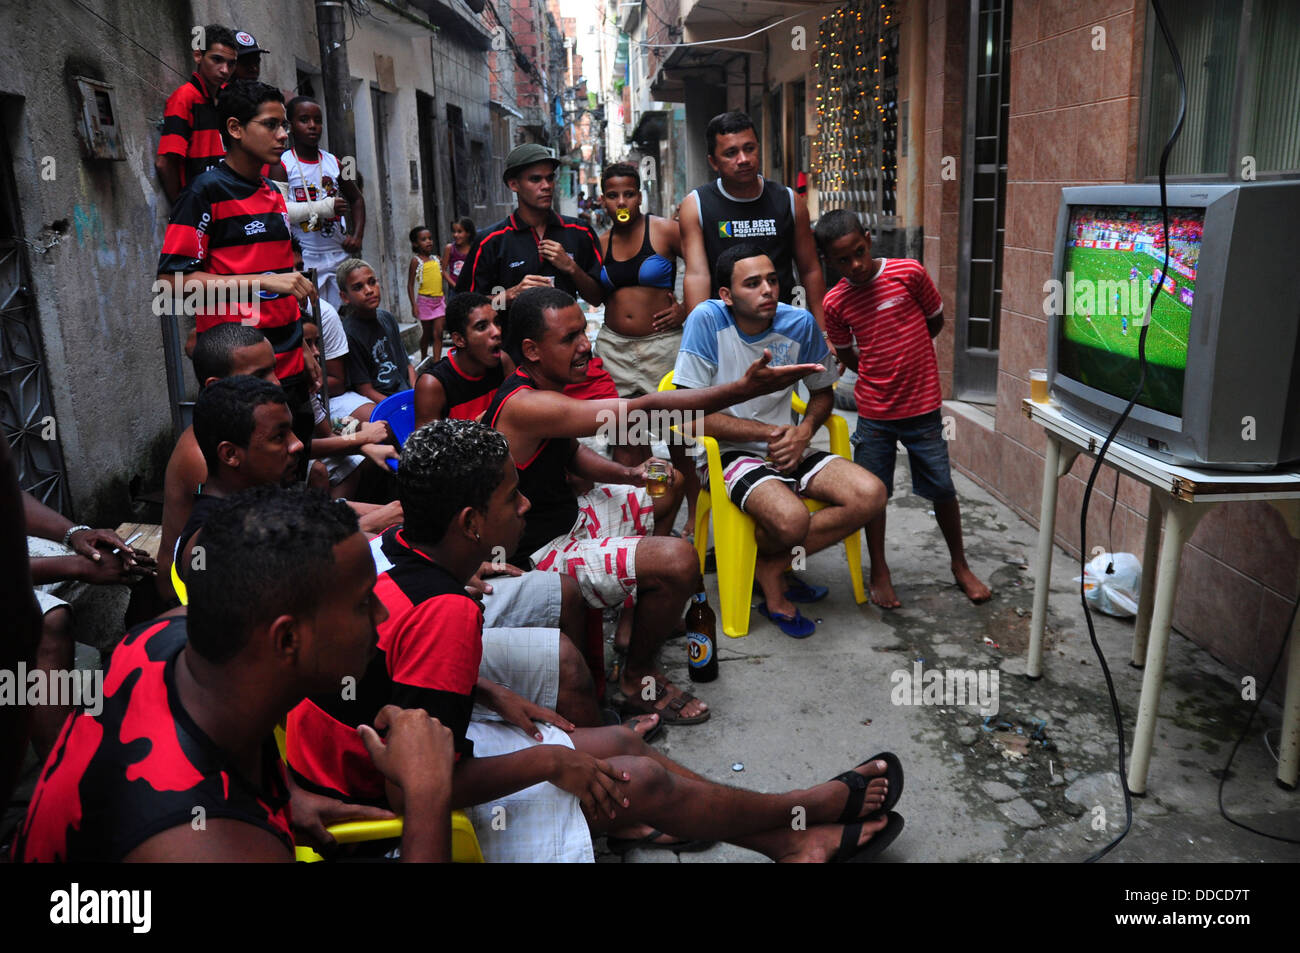 Flamego fans watch soccer game on TV in a Favela da Mare alley